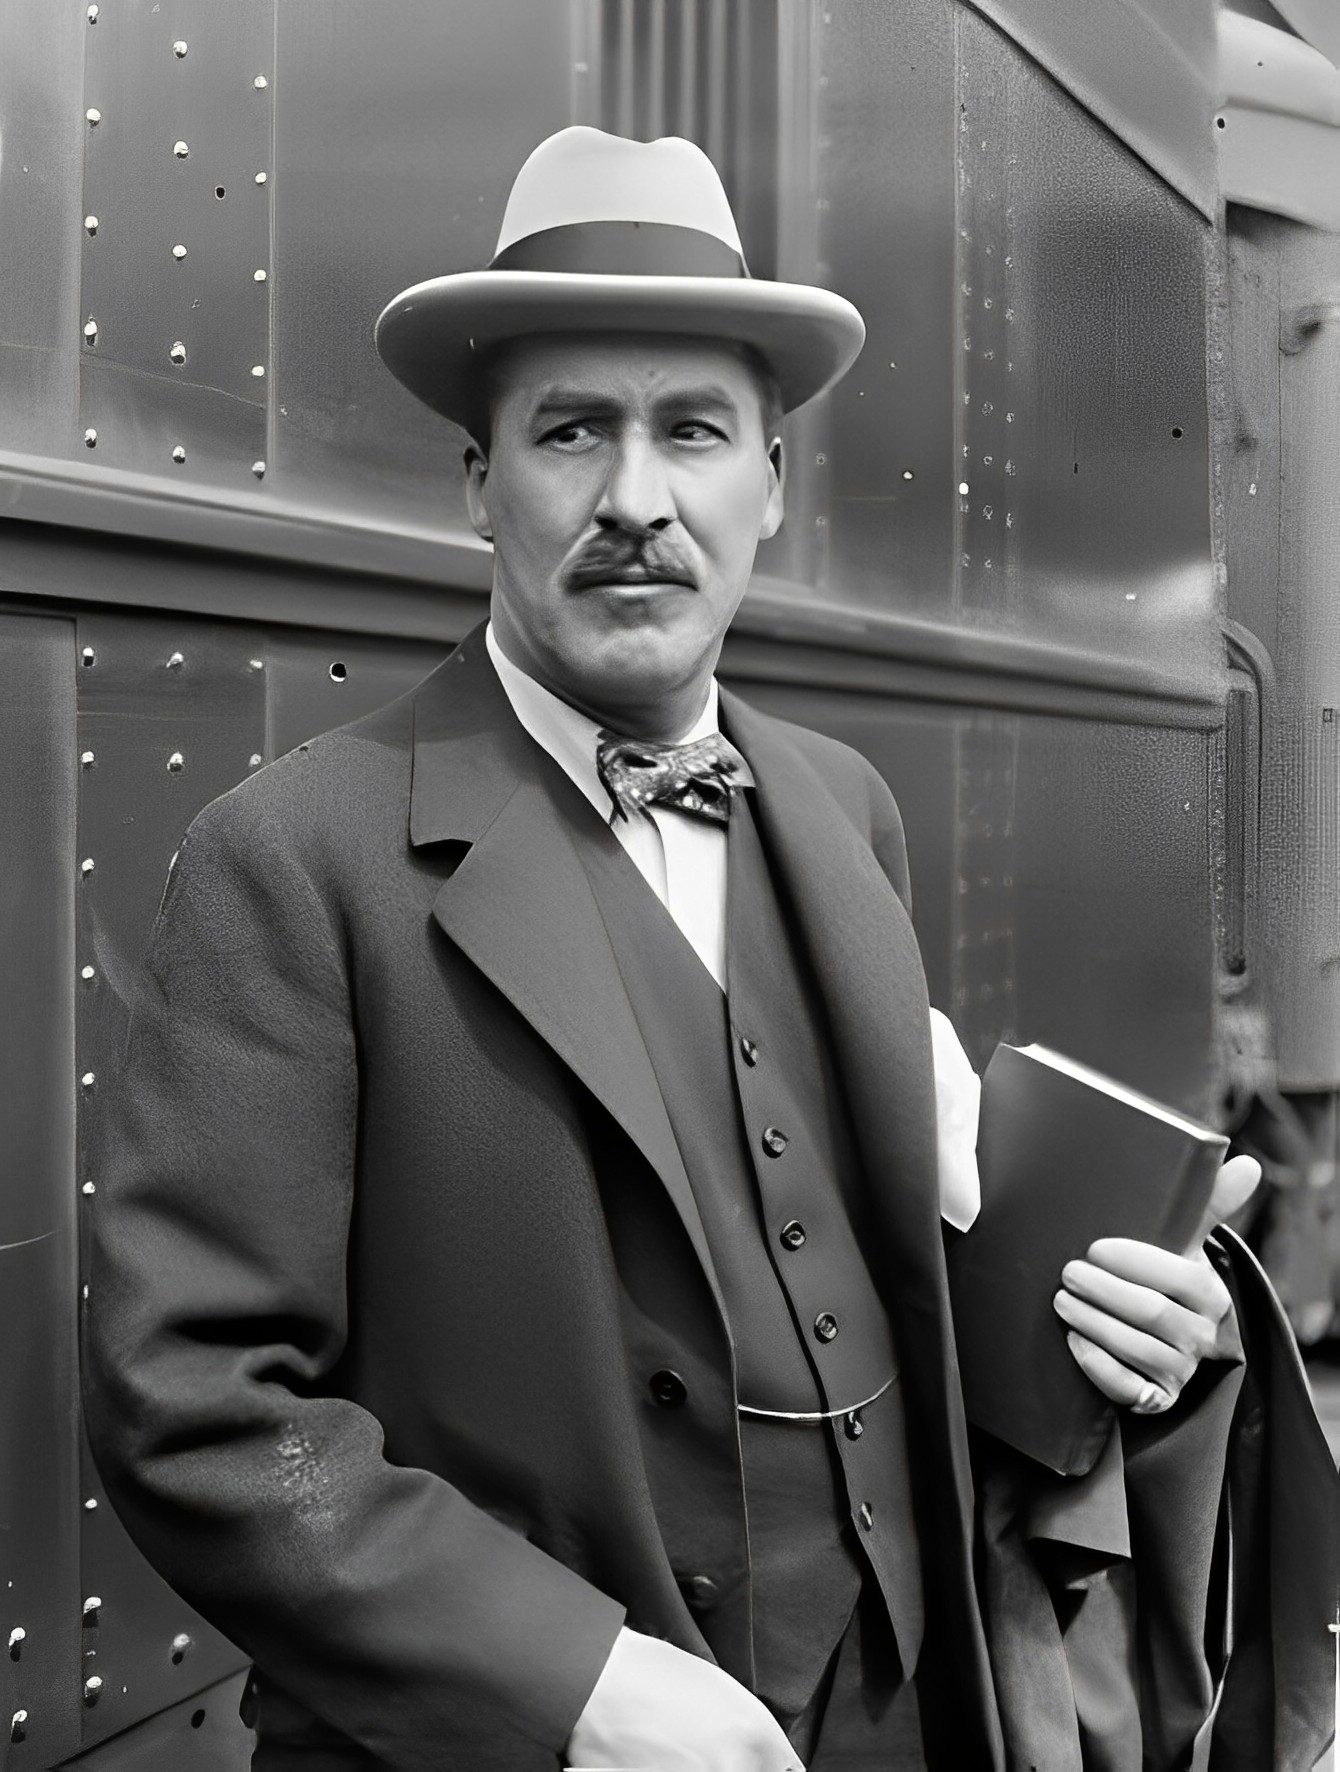 Informal portrait of howard carter the archaeologist standing with a book in his hand next to a train at a station in chicago illinois